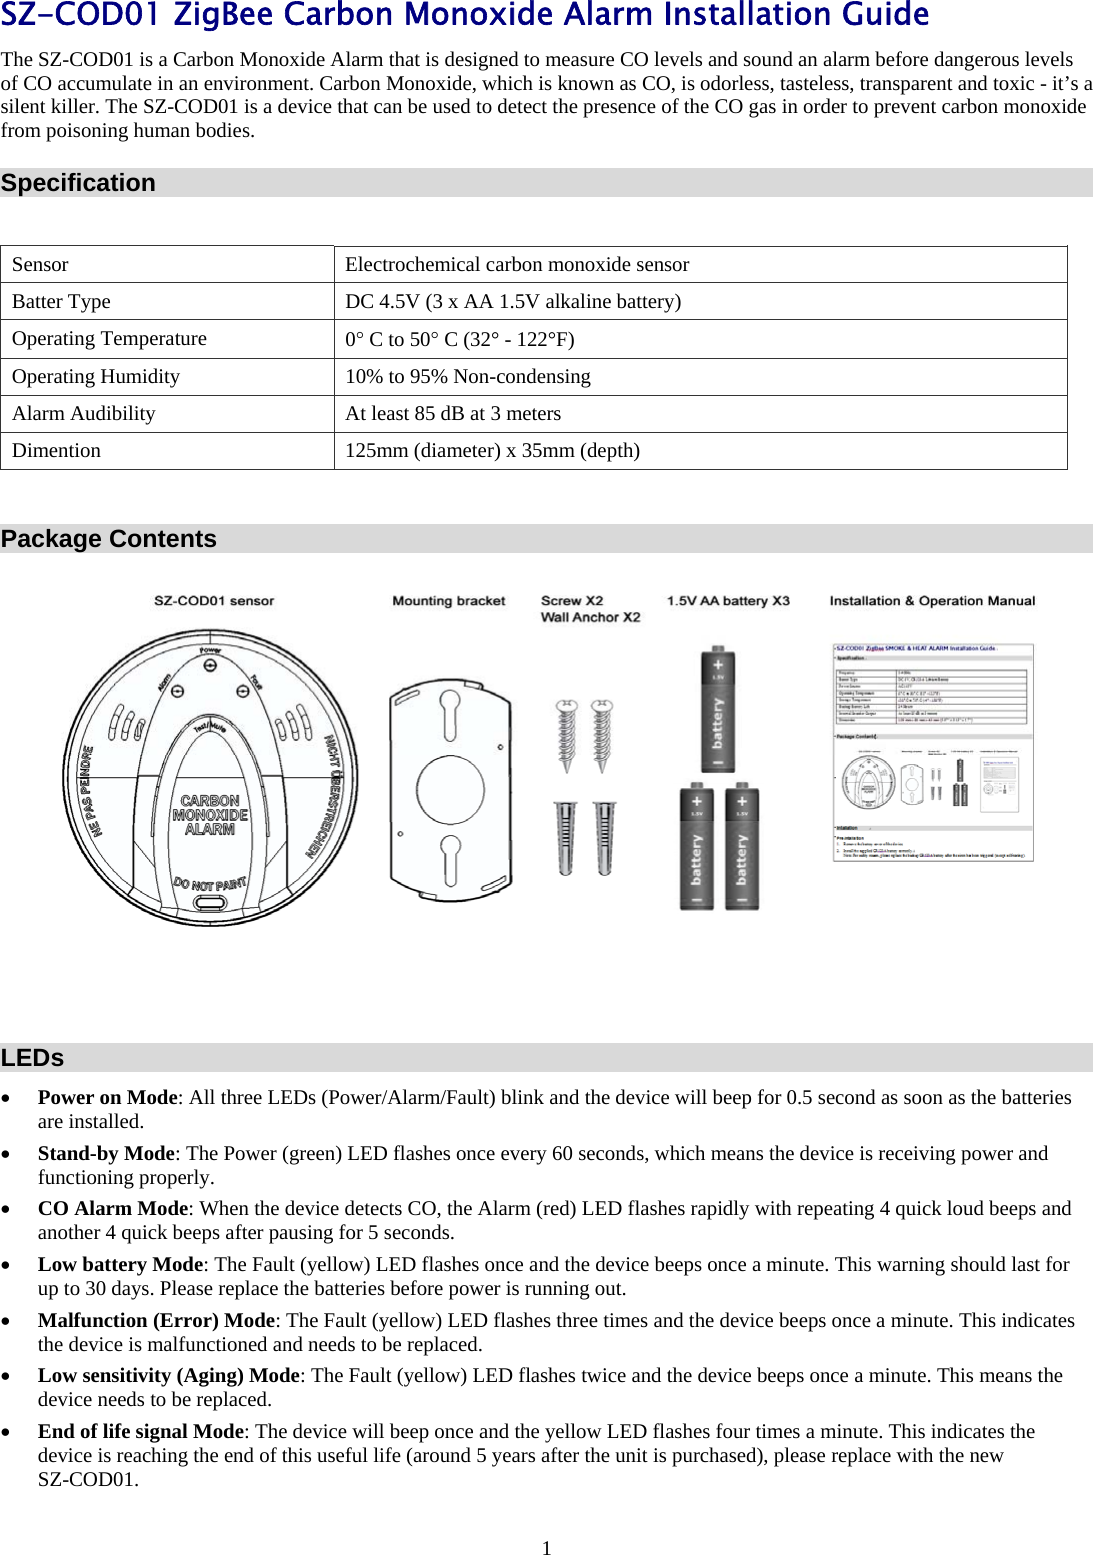 1 SZ-COD01 ZigBee Carbon Monoxide Alarm Installation Guide The SZ-COD01 is a Carbon Monoxide Alarm that is designed to measure CO levels and sound an alarm before dangerous levels of CO accumulate in an environment. Carbon Monoxide, which is known as CO, is odorless, tasteless, transparent and toxic - it’s a silent killer. The SZ-COD01 is a device that can be used to detect the presence of the CO gas in order to prevent carbon monoxide from poisoning human bodies. Specification  Sensor  Electrochemical carbon monoxide sensor Batter Type  DC 4.5V (3 x AA 1.5V alkaline battery) Operating Temperature  0 C to 50 C (32° - 122°F) Operating Humidity  10% to 95% Non-condensing Alarm Audibility  At least 85 dB at 3 meters Dimention  125mm (diameter) x 35mm (depth)  Package Contents    LEDs  Power on Mode: All three LEDs (Power/Alarm/Fault) blink and the device will beep for 0.5 second as soon as the batteries are installed.  Stand-by Mode: The Power (green) LED flashes once every 60 seconds, which means the device is receiving power and functioning properly.  CO Alarm Mode: When the device detects CO, the Alarm (red) LED flashes rapidly with repeating 4 quick loud beeps and another 4 quick beeps after pausing for 5 seconds.  Low battery Mode: The Fault (yellow) LED flashes once and the device beeps once a minute. This warning should last for up to 30 days. Please replace the batteries before power is running out.  Malfunction (Error) Mode: The Fault (yellow) LED flashes three times and the device beeps once a minute. This indicates the device is malfunctioned and needs to be replaced.  Low sensitivity (Aging) Mode: The Fault (yellow) LED flashes twice and the device beeps once a minute. This means the device needs to be replaced.       End of life signal Mode: The device will beep once and the yellow LED flashes four times a minute. This indicates the device is reaching the end of this useful life (around 5 years after the unit is purchased), please replace with the new  SZ-COD01. 